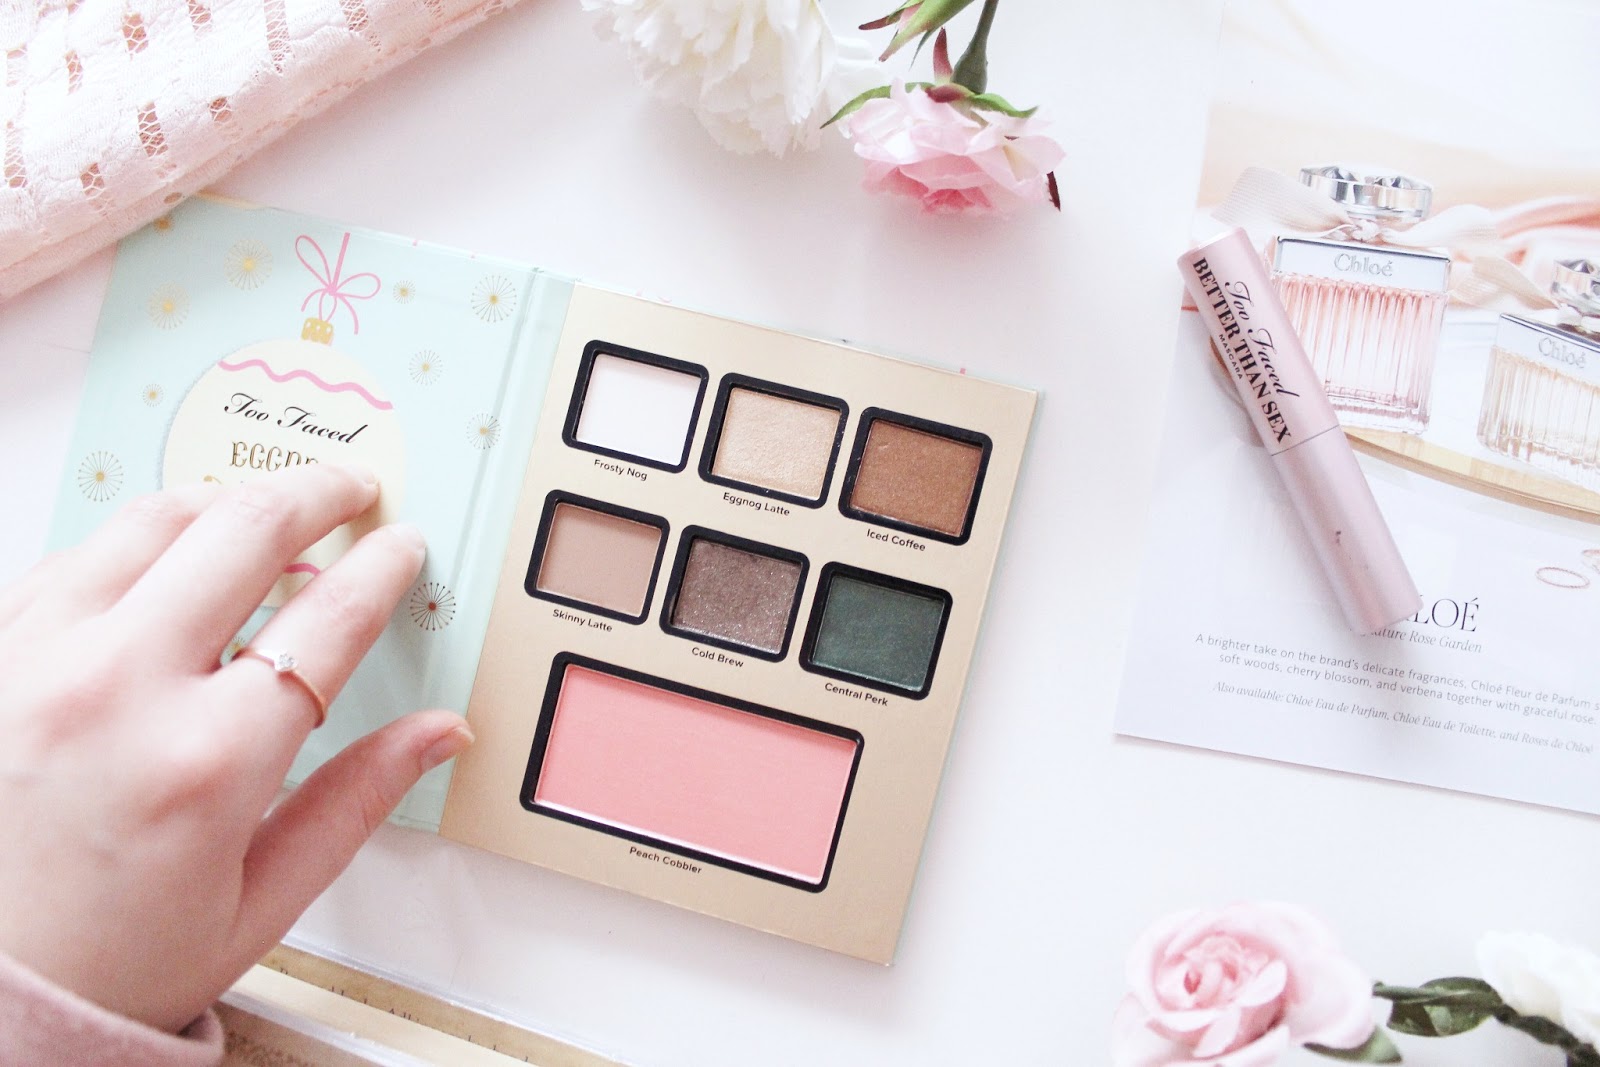 "Ice Cream" whispers Clara | Romantic and Lifestyle blog: Too Faced